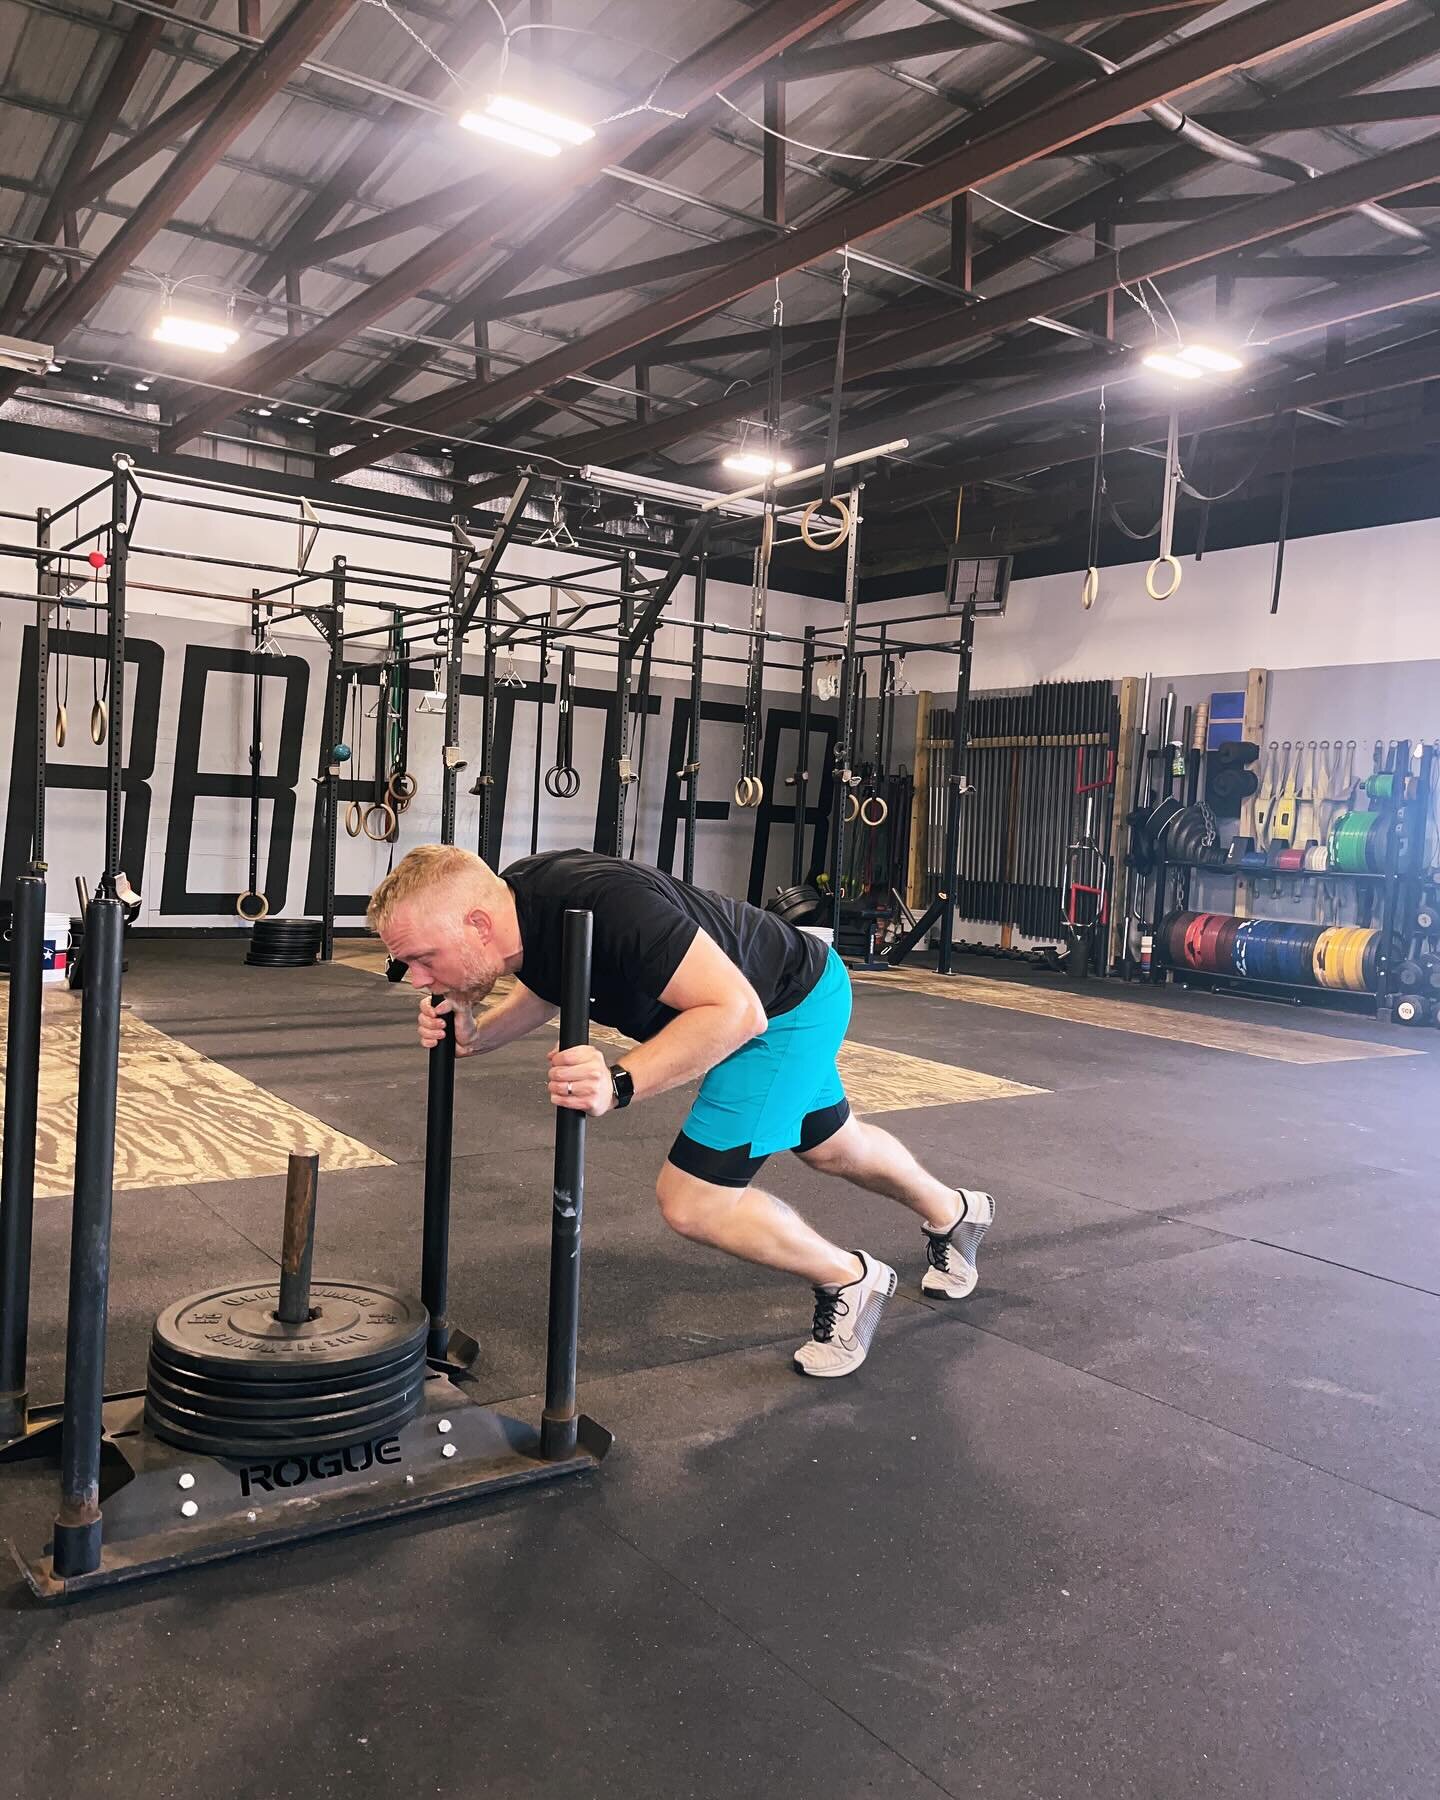 We frequently hear from patients they are unable to squat due to chronic knee pain. Here are 3 great options to work on your leg strength that are typically tolerated well by our clients experiencing knee pain. They also provide a great primer to re-